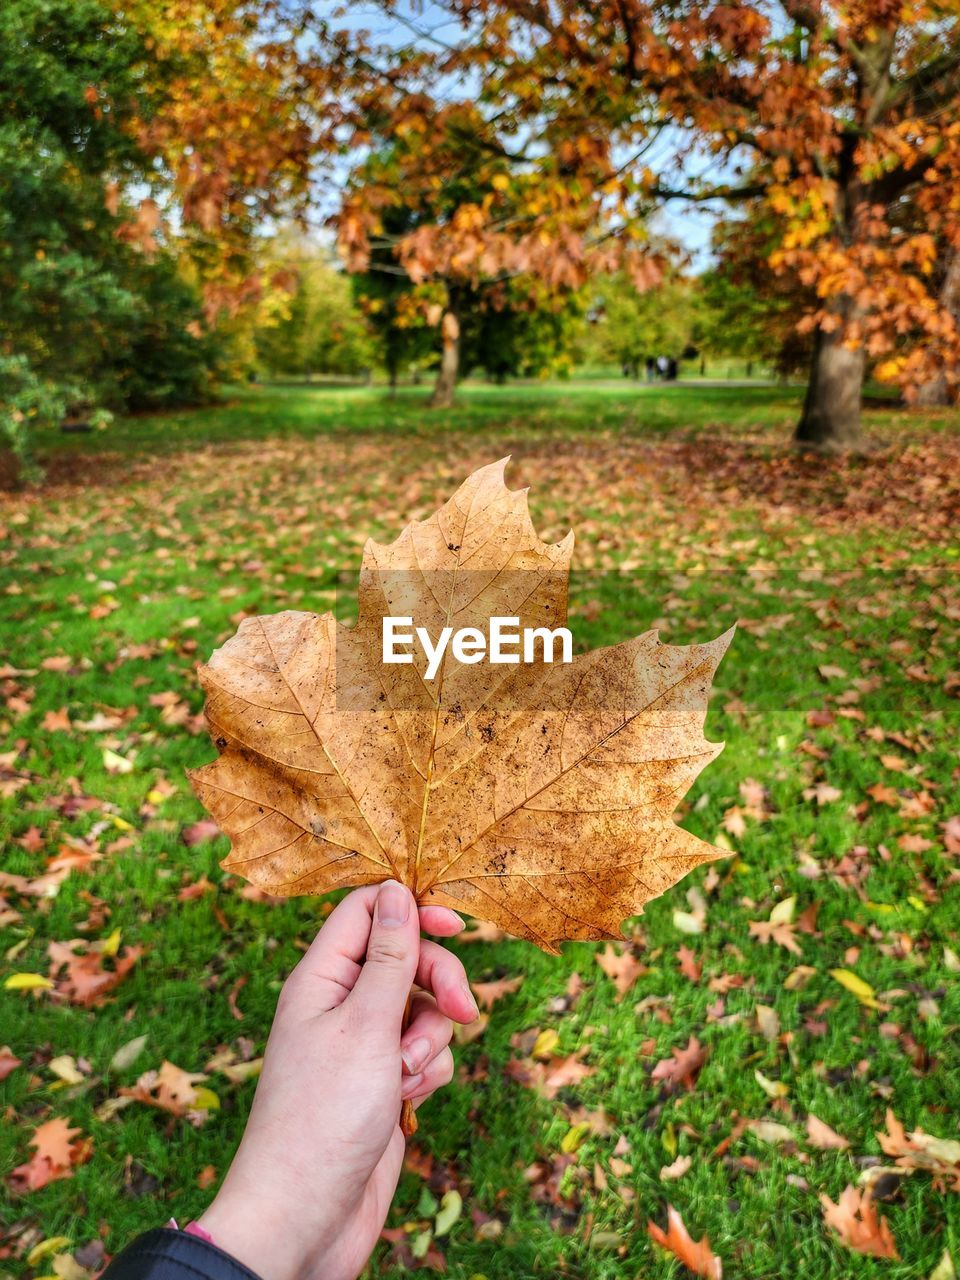 autumn, leaf, plant part, tree, plant, one person, nature, hand, day, maple leaf, holding, personal perspective, maple, dry, leaves, falling, outdoors, leisure activity, orange color, land, lifestyles, beauty in nature, woodland, flower, close-up, autumn collection, grass, leaf vein, natural condition, lawn, yellow, adult, focus on foreground, park, finger, field, sunlight